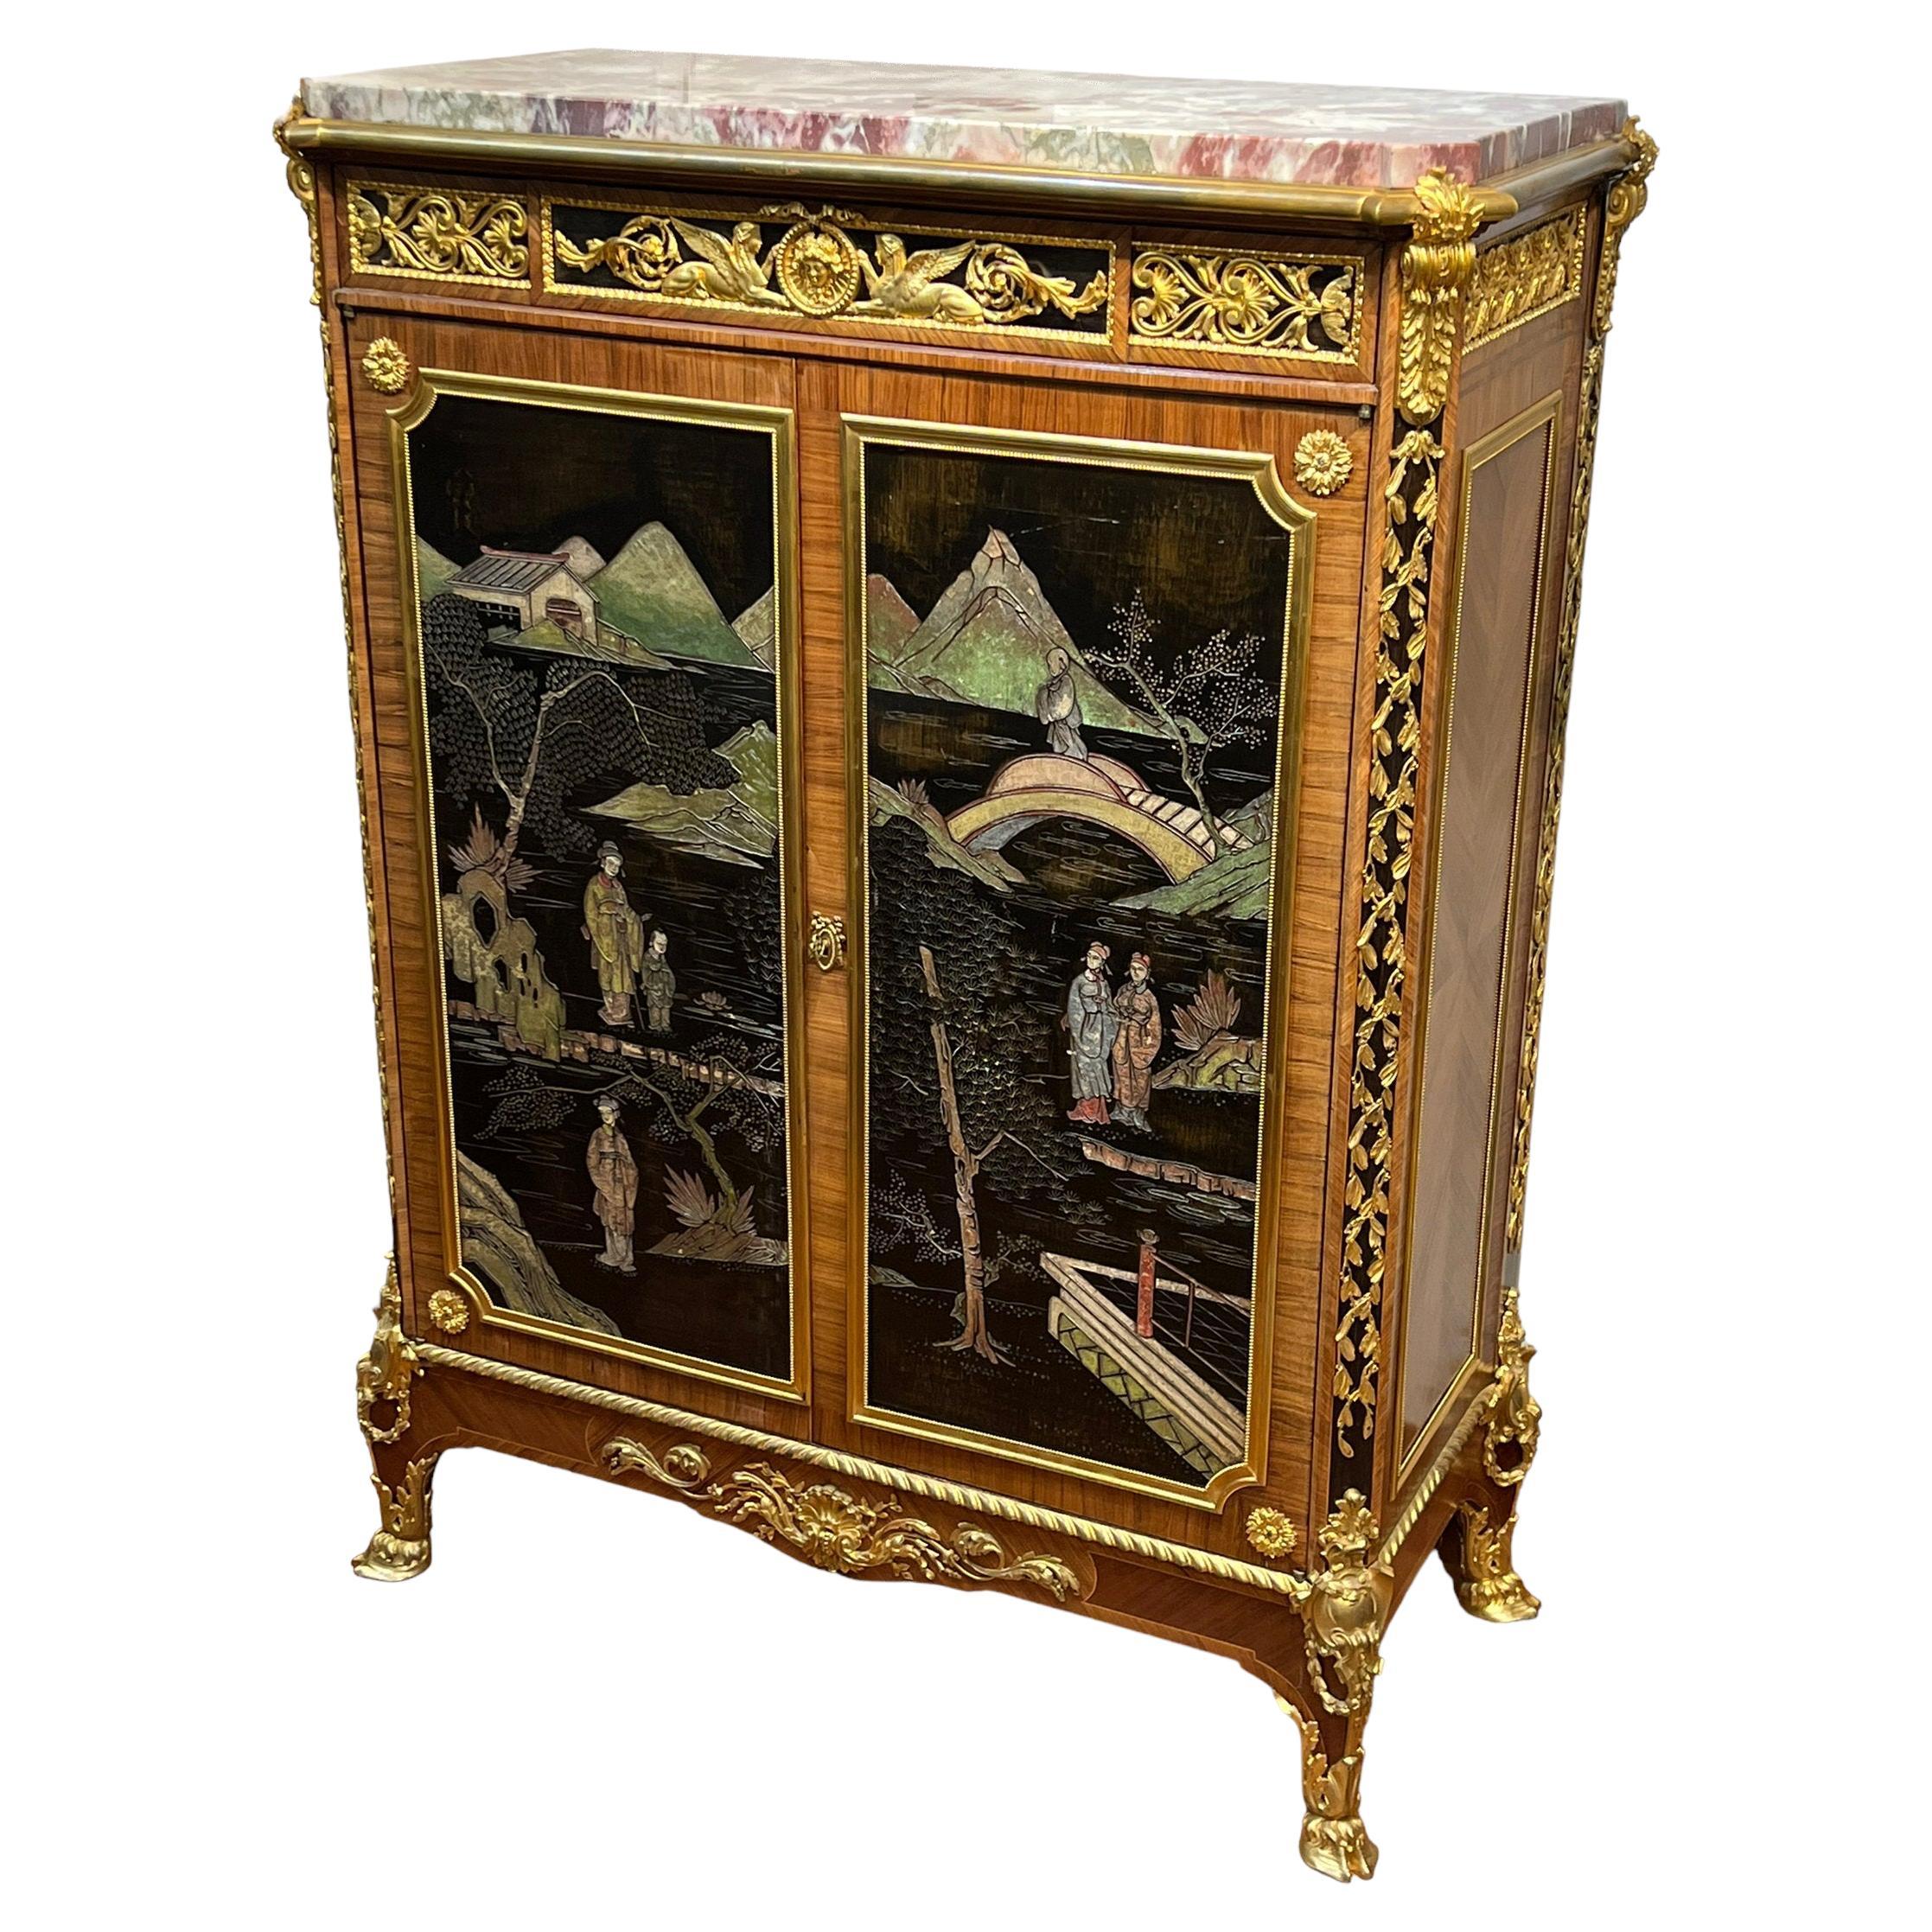 French Chinoiserie Side Cabinet in Louis XVI Style with Coromandel Panels c1900